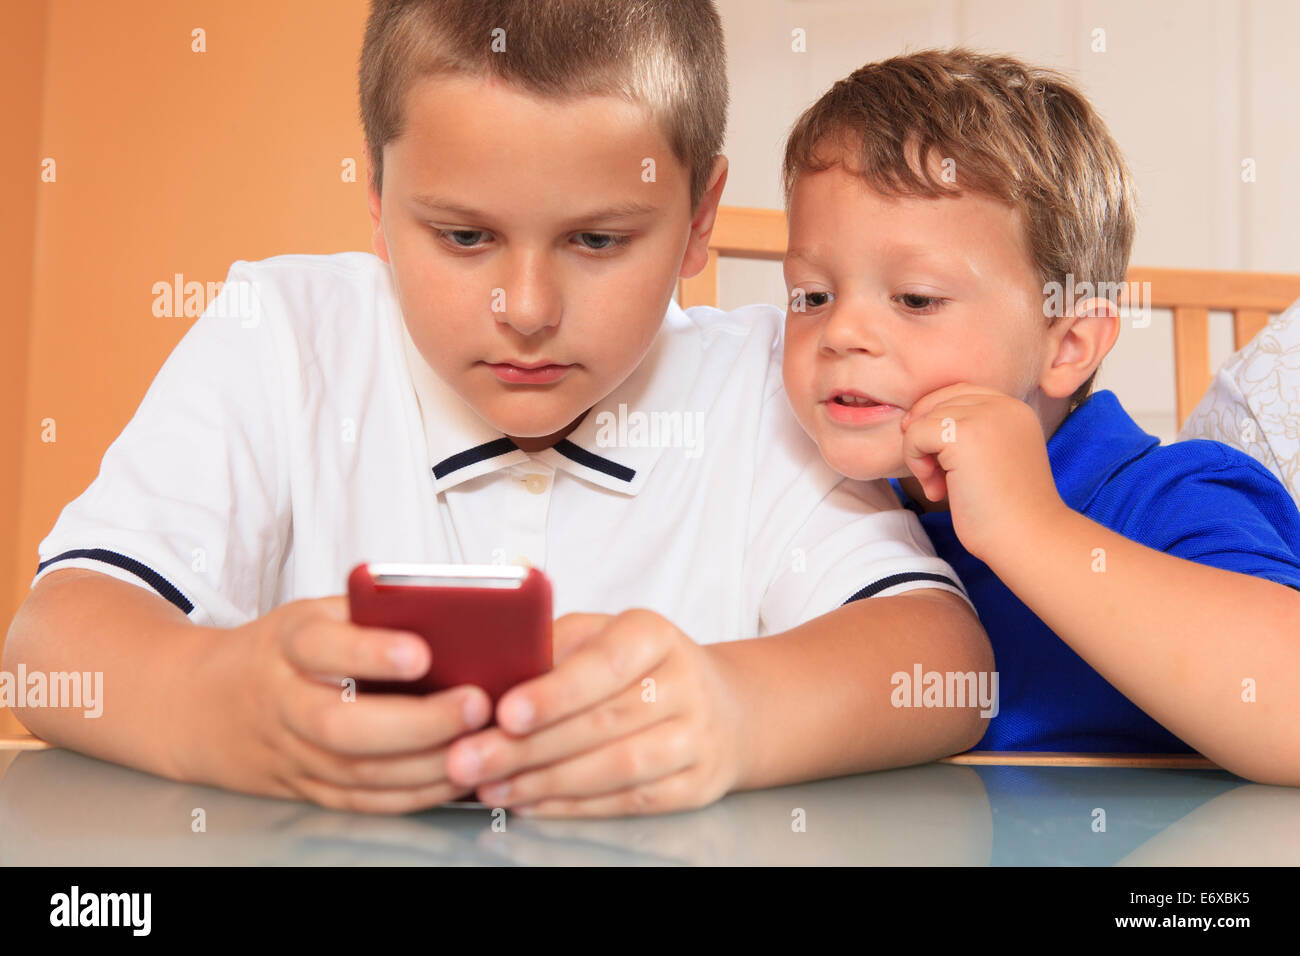 Young boys playing with their cell phone Stock Photo